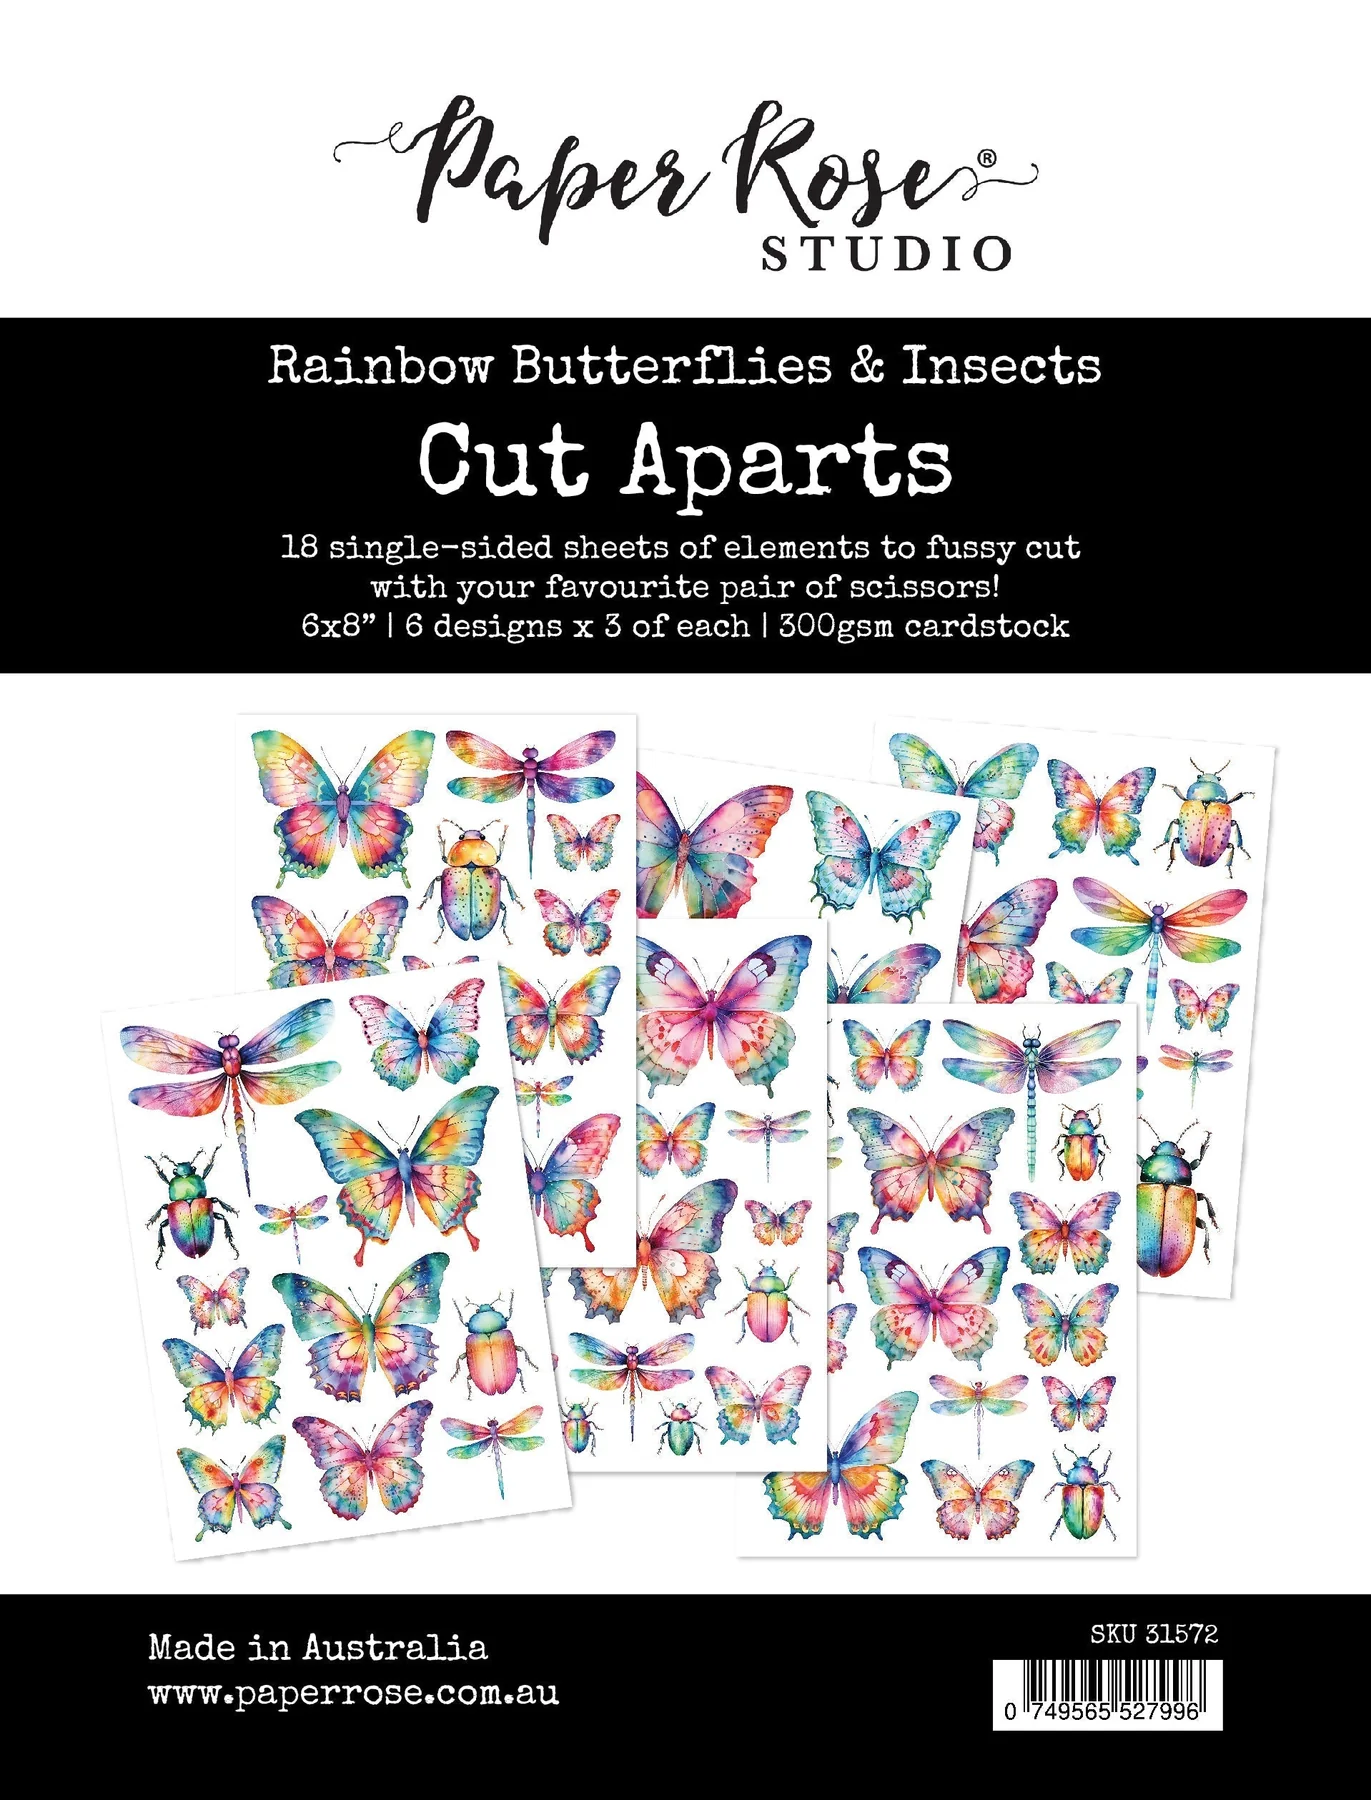 Rainbow Butterflies & Insects Cut Aparts Paper Pack 31572